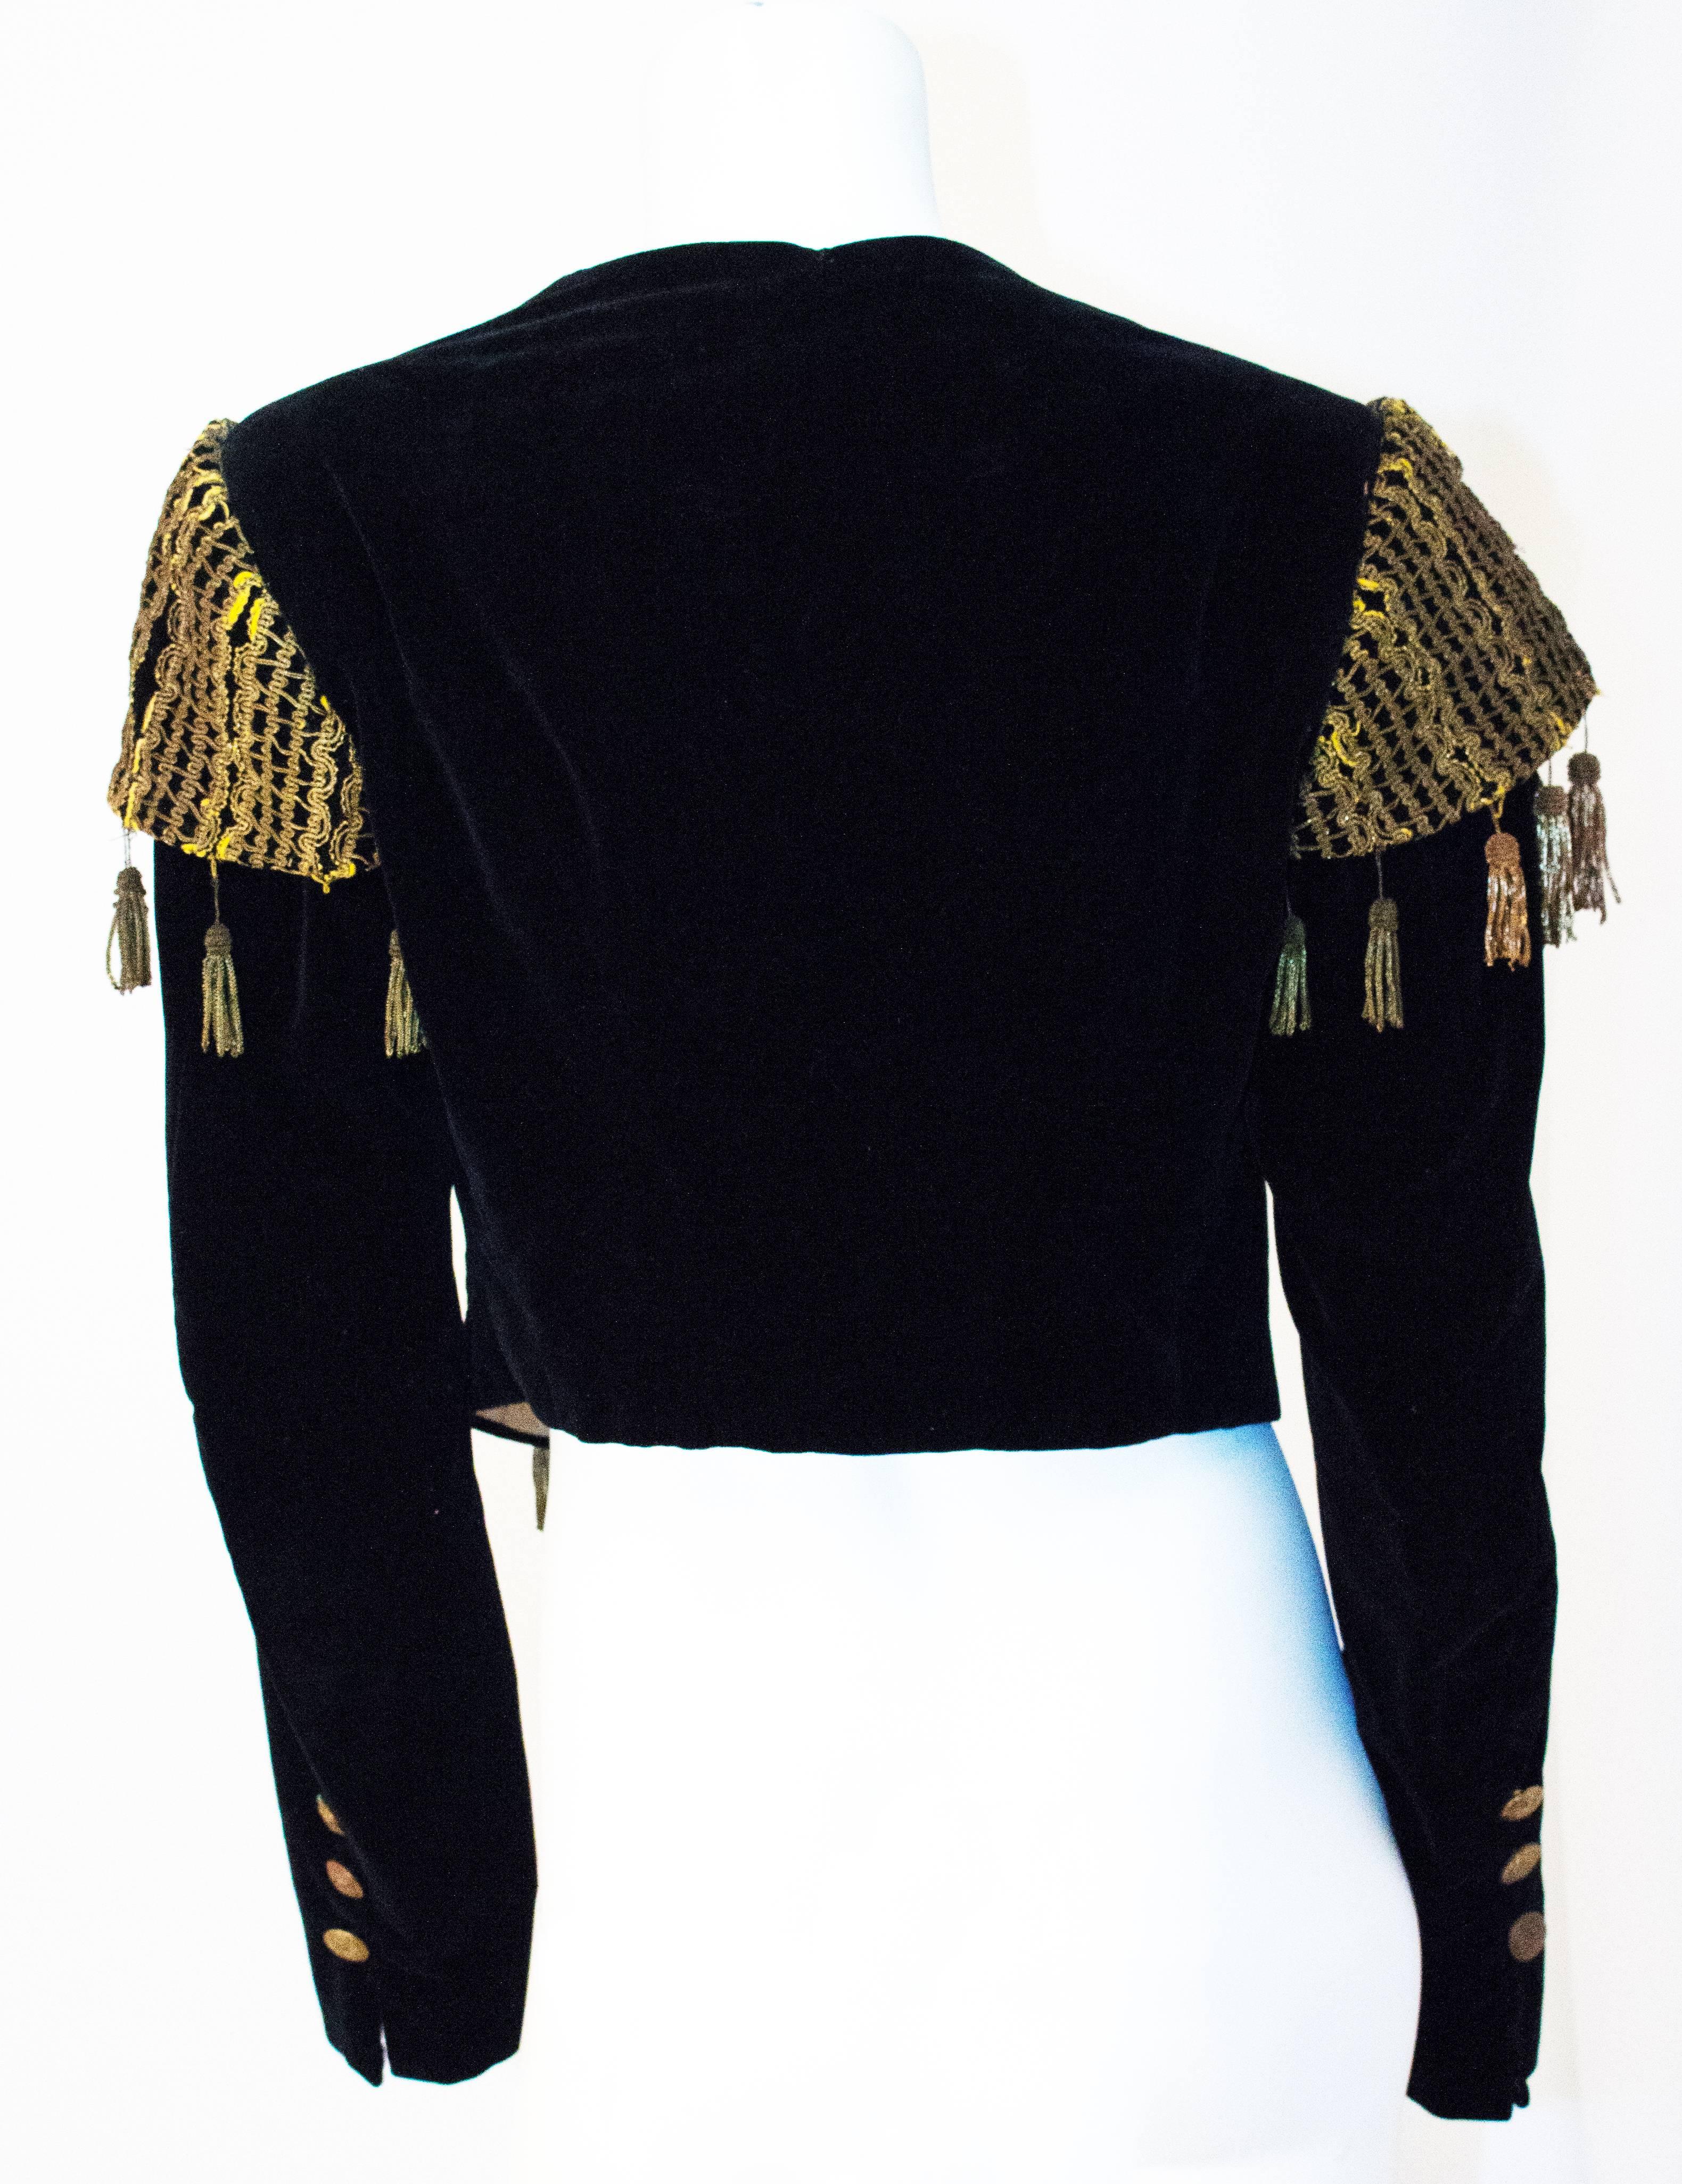 20s Black Velvet Bolero Jacket with Gold Metal Tassels & Embroidery. Lined in cotton. Not meant to close, worn open. Slight shoulder padding. Slightly longer in the front. 

Front Length: 18 1/2 inches
Back Length: 15 1/2 inches 

Shoulder